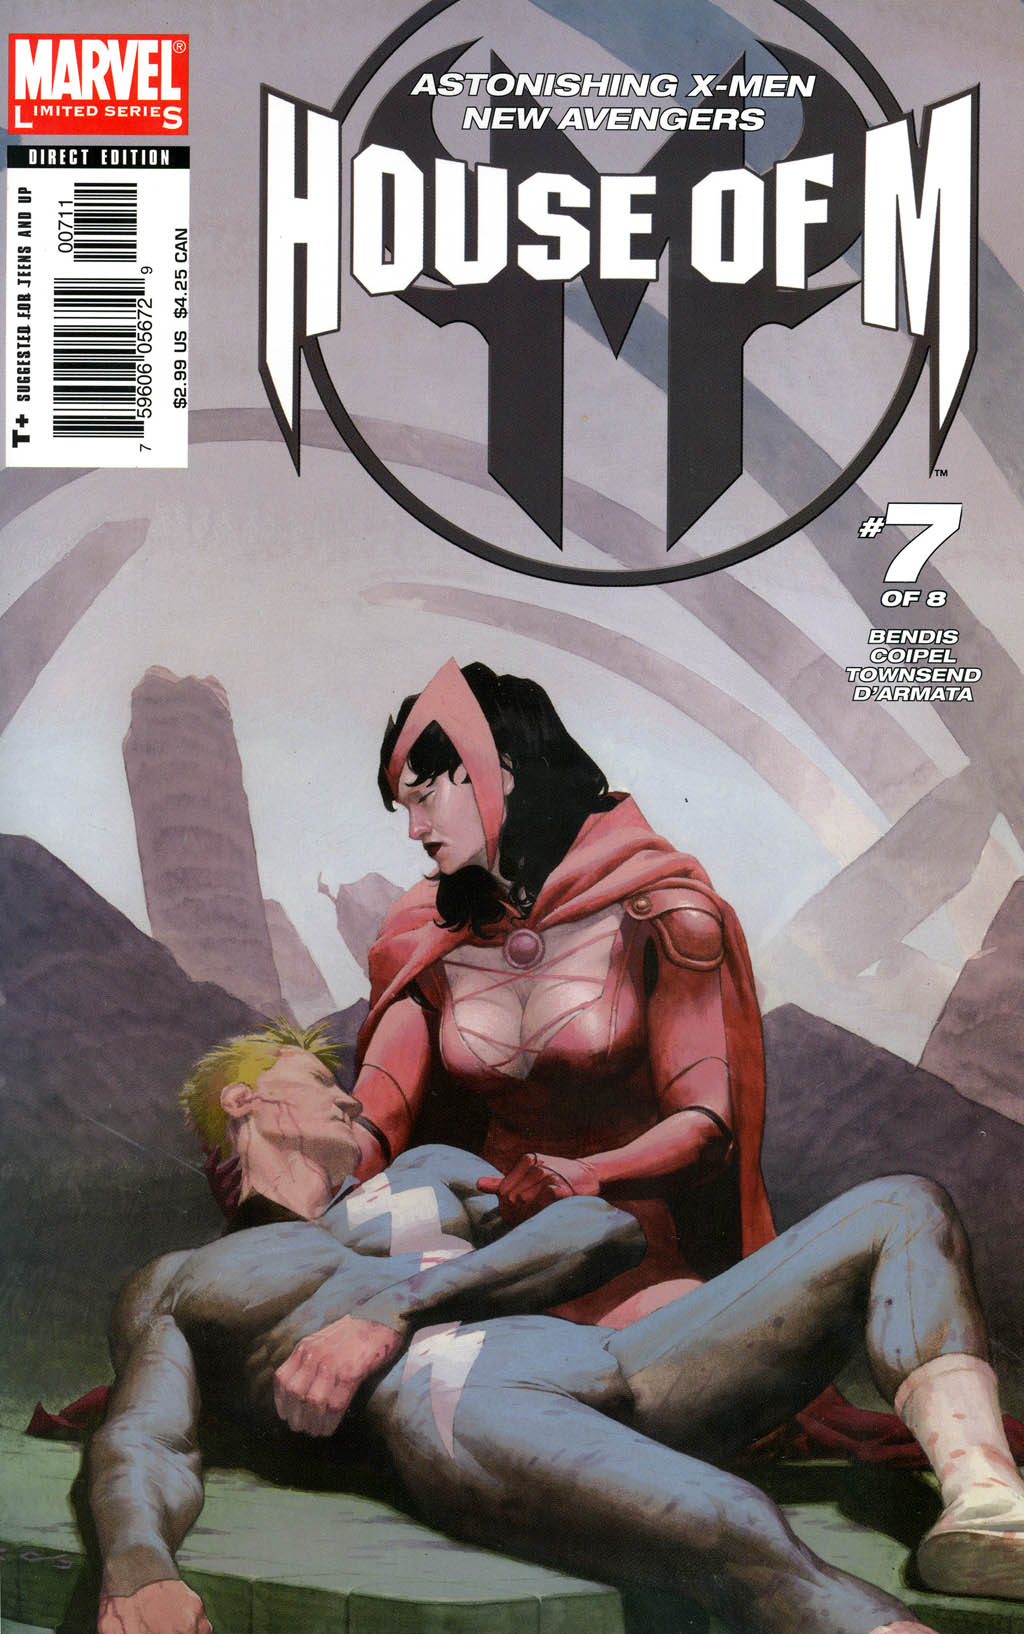 House of M 7 of 8